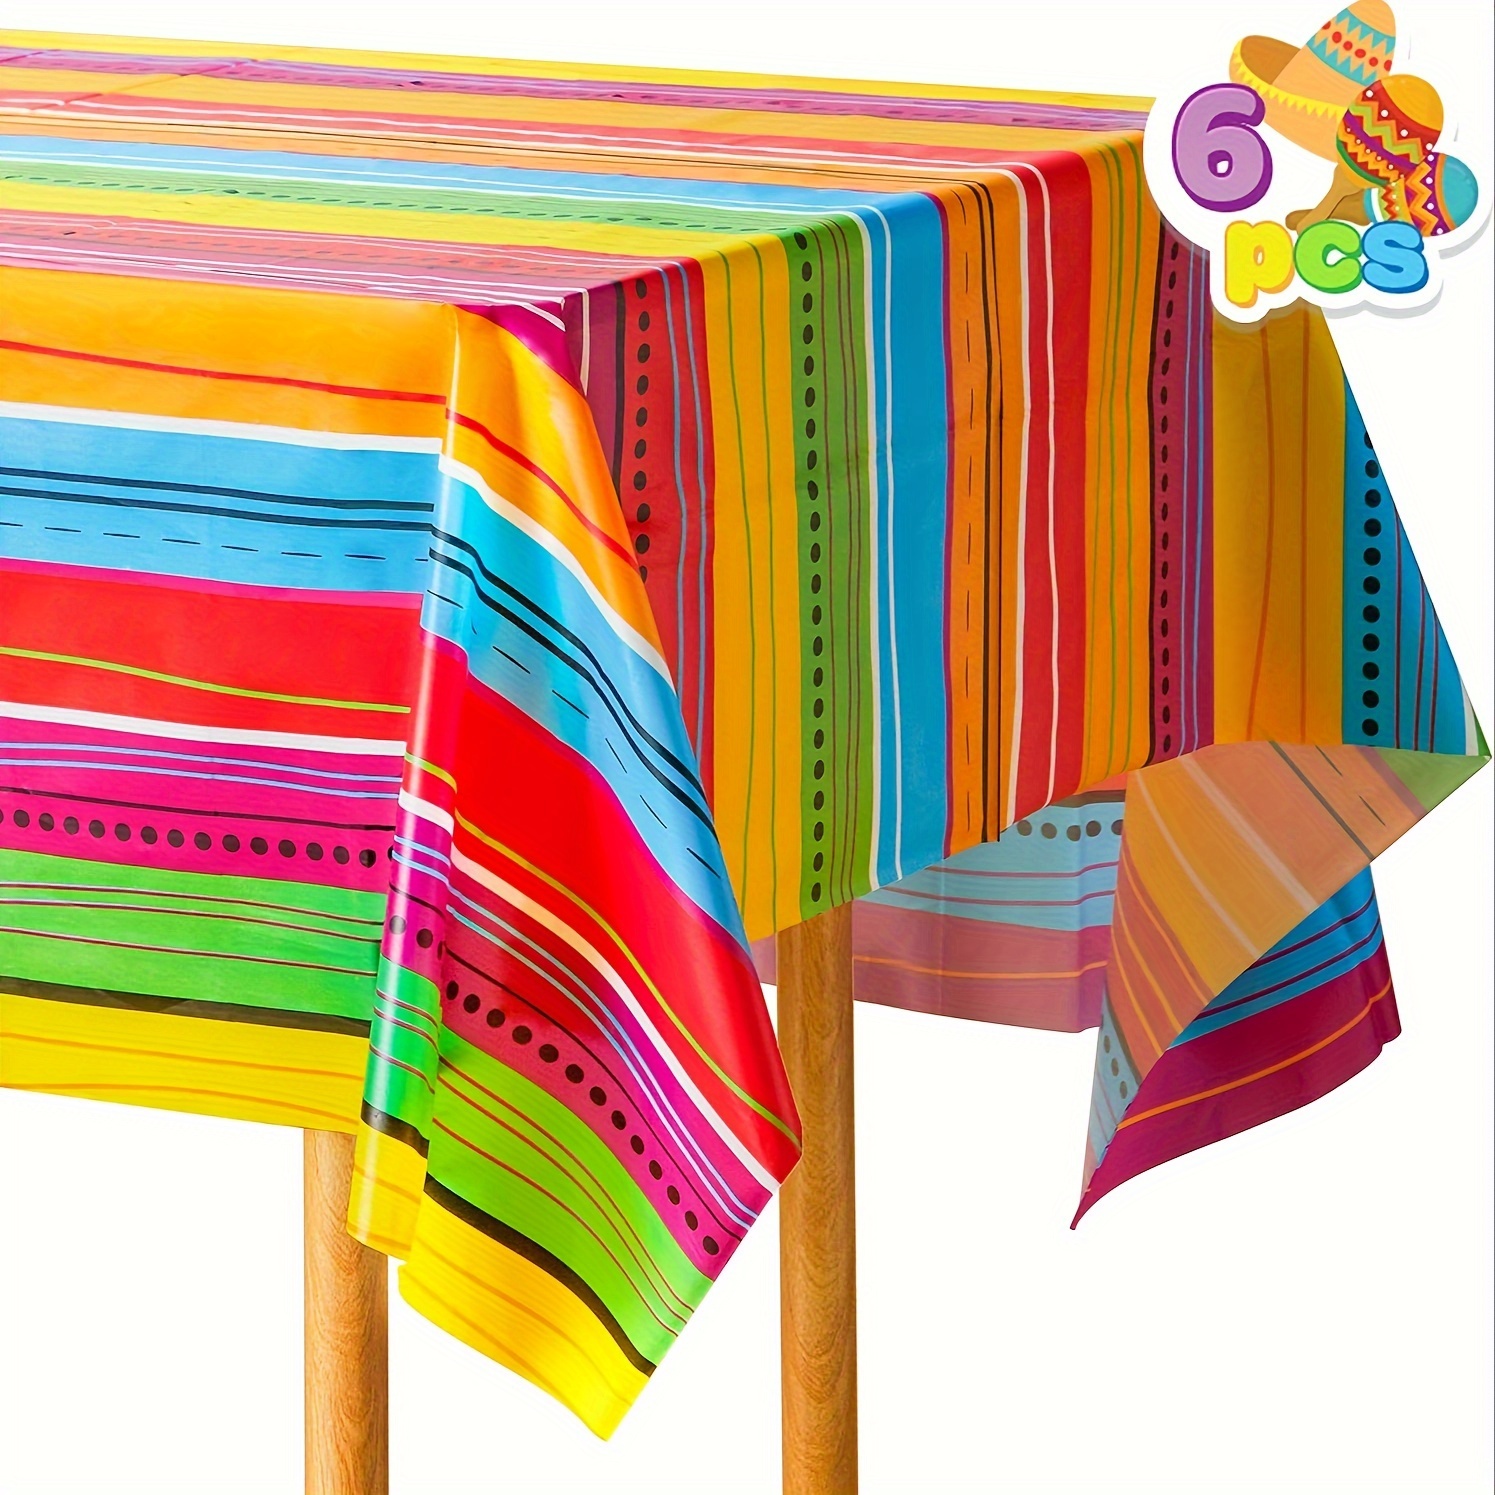 

1pc Colorful Plastic Tablecloths For Mexican Independence Day & Day Of The Dead Carnival Parties, Durable Waterproof Table Covers, 54x108 Inches Festive Multi-colored Decor